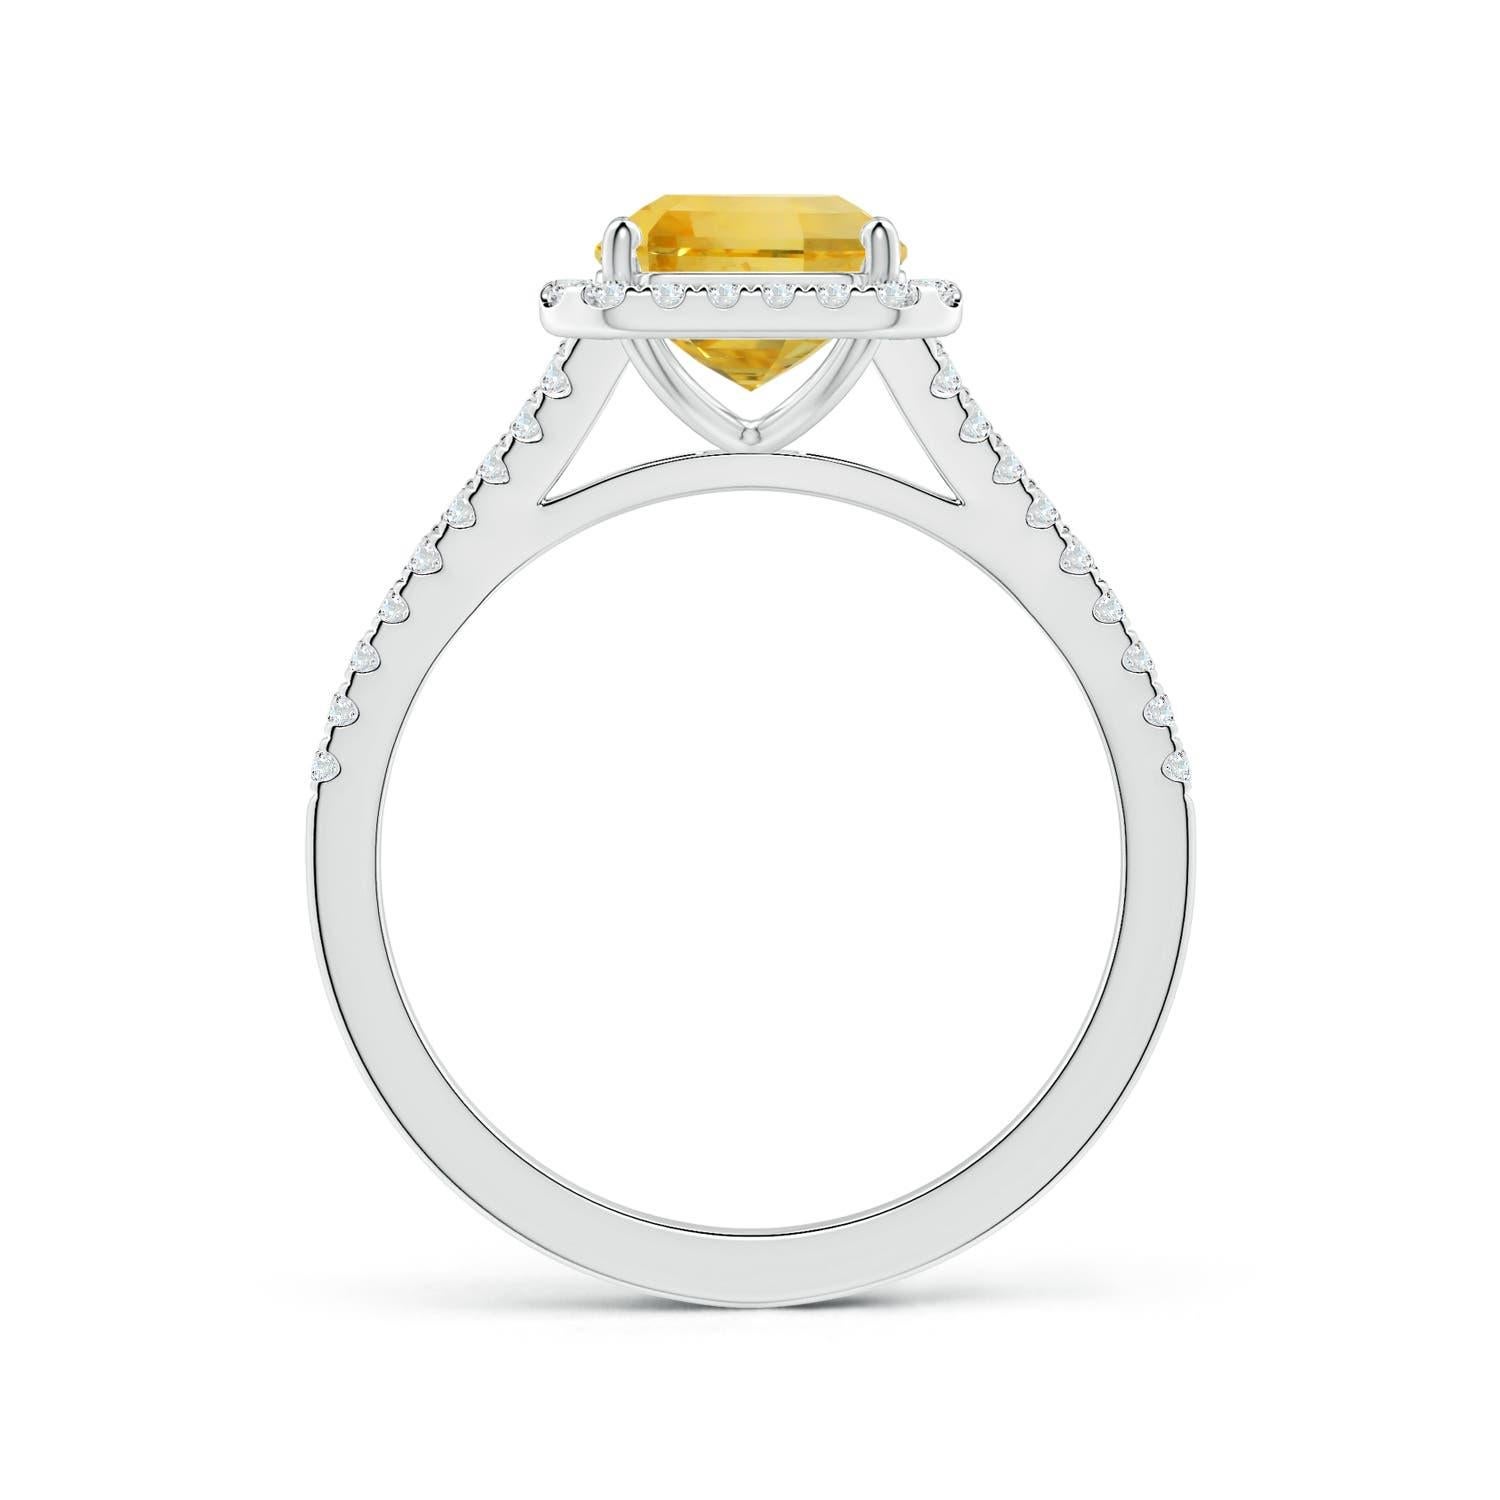 For Sale:  Angara GIA Certified Natural Emerald-Cut Yellow Sapphire Halo Ring in Platinum  2